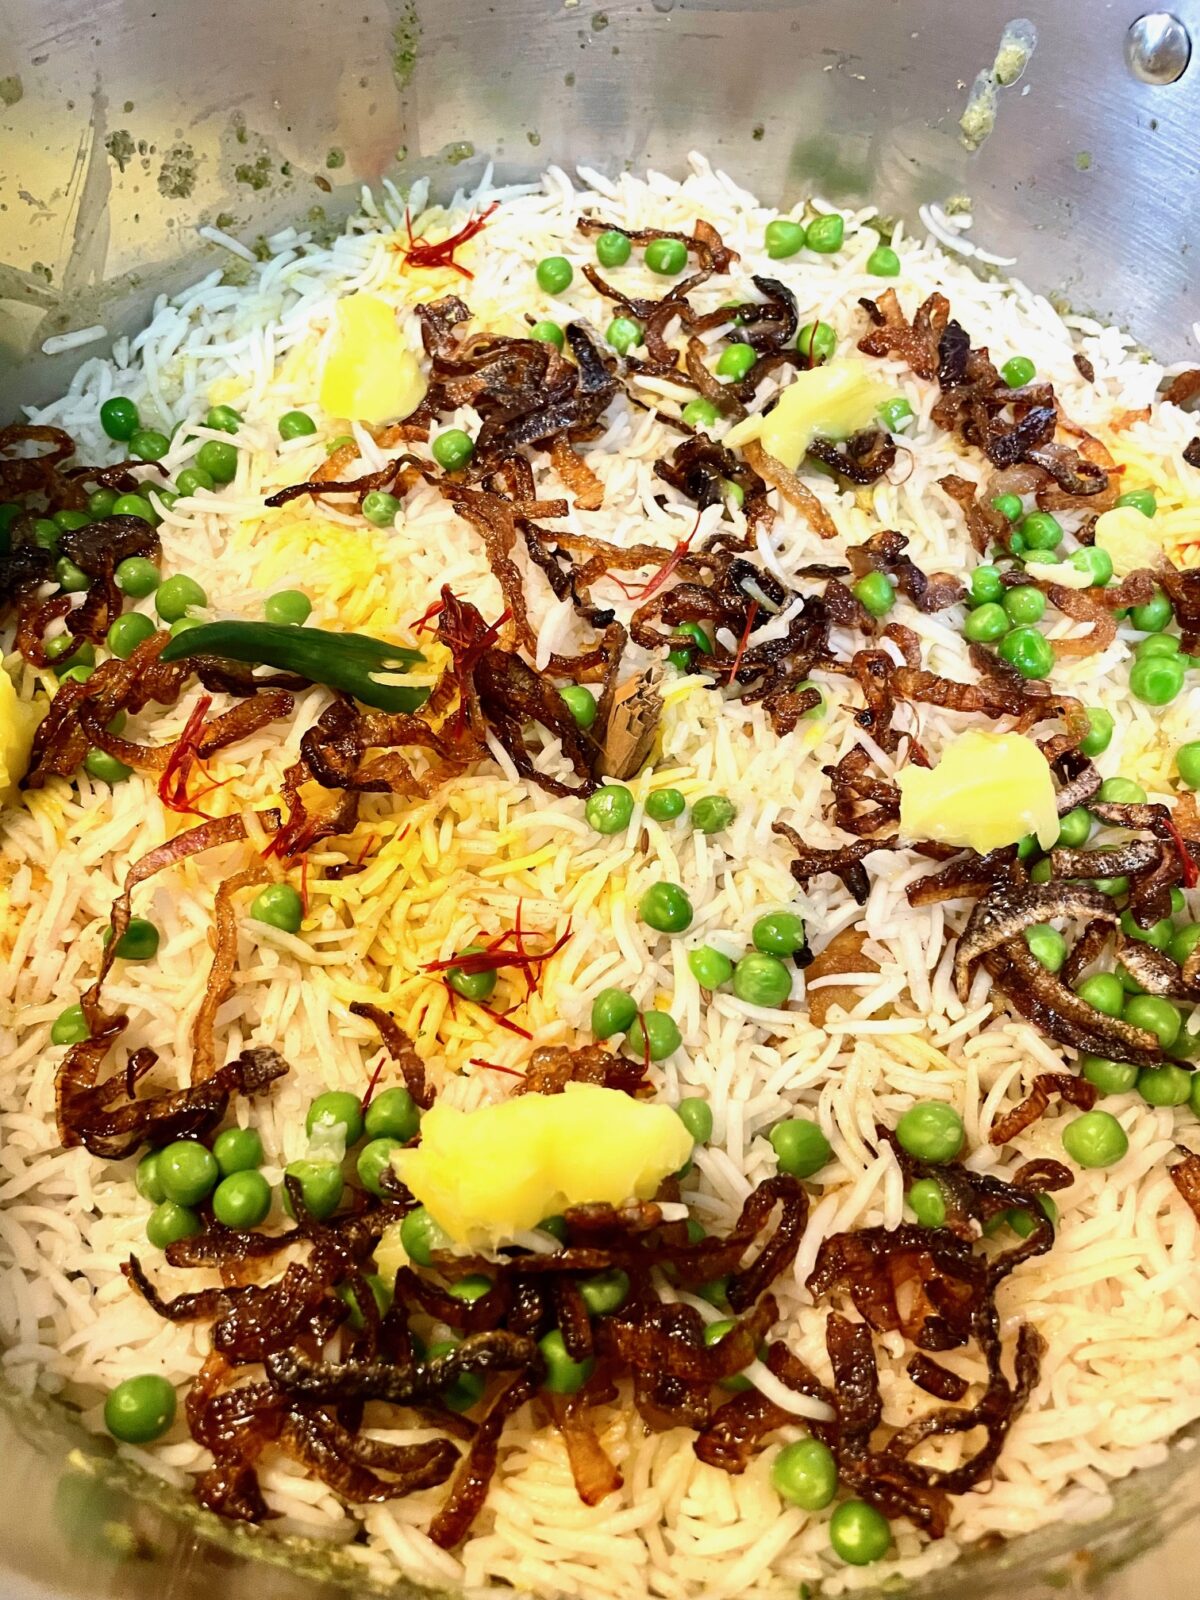 Top of chicken briani pre-cooking. Partially cooked basmati rice is topped with green peas, fried red onion, cultured ghee, green chili and saffron.